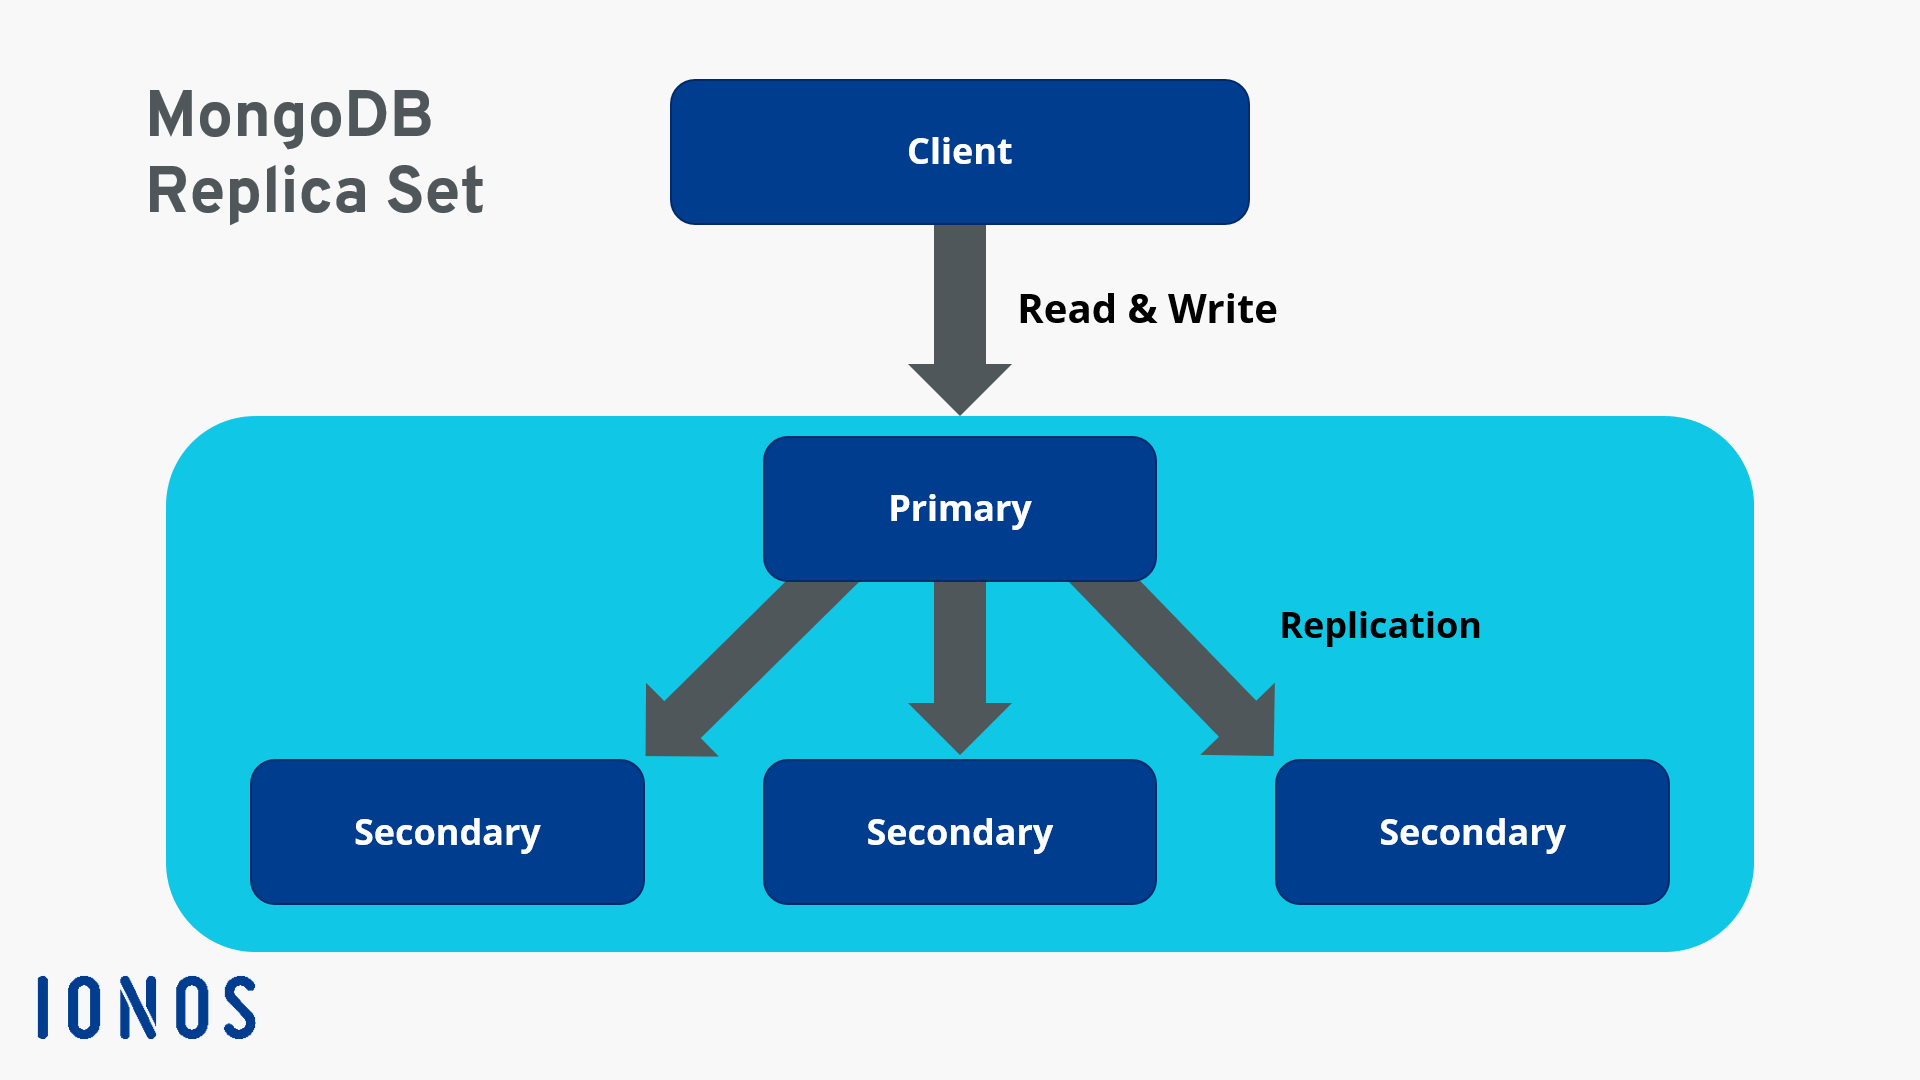 An example image of the setup of one primary and three secondary nodes